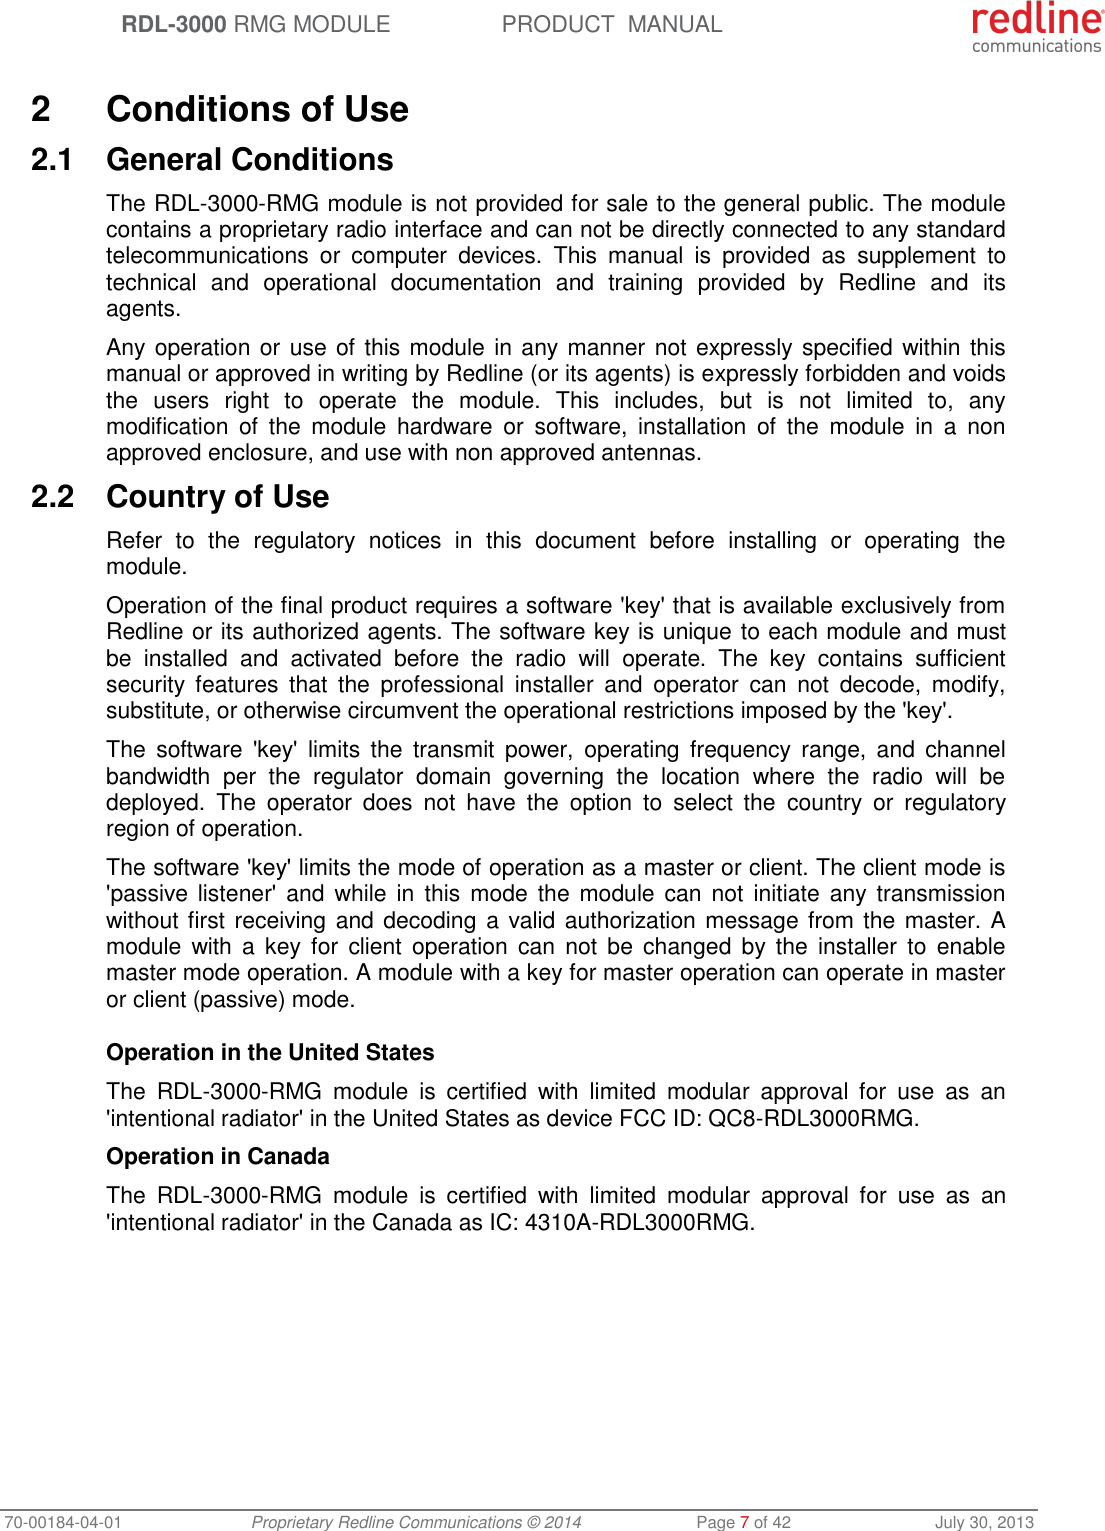  RDL-3000 RMG MODULE PRODUCT  MANUAL 70-00184-04-01 Proprietary Redline Communications © 2014  Page 7 of 42  July 30, 2013  2  Conditions of Use 2.1  General Conditions The RDL-3000-RMG module is not provided for sale to the general public. The module contains a proprietary radio interface and can not be directly connected to any standard telecommunications  or  computer  devices.  This  manual  is  provided  as  supplement  to technical  and  operational  documentation  and  training  provided  by  Redline  and  its agents.  Any operation or use of this module in any manner not expressly specified within this manual or approved in writing by Redline (or its agents) is expressly forbidden and voids the  users  right  to  operate  the  module.  This  includes,  but  is  not  limited  to,  any modification  of  the  module  hardware  or  software,  installation  of  the  module  in  a  non approved enclosure, and use with non approved antennas. 2.2  Country of Use Refer  to  the  regulatory  notices  in  this  document  before  installing  or  operating  the module.  Operation of the final product requires a software &apos;key&apos; that is available exclusively from Redline or its authorized agents. The software key is unique to each module and must be  installed  and  activated  before  the  radio  will  operate.  The  key  contains  sufficient security  features  that  the  professional  installer  and  operator  can  not  decode,  modify, substitute, or otherwise circumvent the operational restrictions imposed by the &apos;key&apos;. The  software  &apos;key&apos;  limits  the  transmit  power,  operating  frequency  range,  and  channel bandwidth  per  the  regulator  domain  governing  the  location  where  the  radio  will  be deployed.  The  operator  does  not  have  the  option  to  select  the  country  or  regulatory region of operation. The software &apos;key&apos; limits the mode of operation as a master or client. The client mode is &apos;passive listener&apos;  and  while  in this mode  the  module  can not  initiate  any  transmission without first receiving and decoding a valid authorization message from the master. A module  with  a  key  for  client operation  can  not  be  changed  by  the  installer  to  enable master mode operation. A module with a key for master operation can operate in master or client (passive) mode.   Operation in the United States The  RDL-3000-RMG  module  is  certified  with  limited  modular  approval  for  use  as  an &apos;intentional radiator&apos; in the United States as device FCC ID: QC8-RDL3000RMG. Operation in Canada The  RDL-3000-RMG  module  is  certified  with  limited  modular  approval  for  use  as  an &apos;intentional radiator&apos; in the Canada as IC: 4310A-RDL3000RMG.   